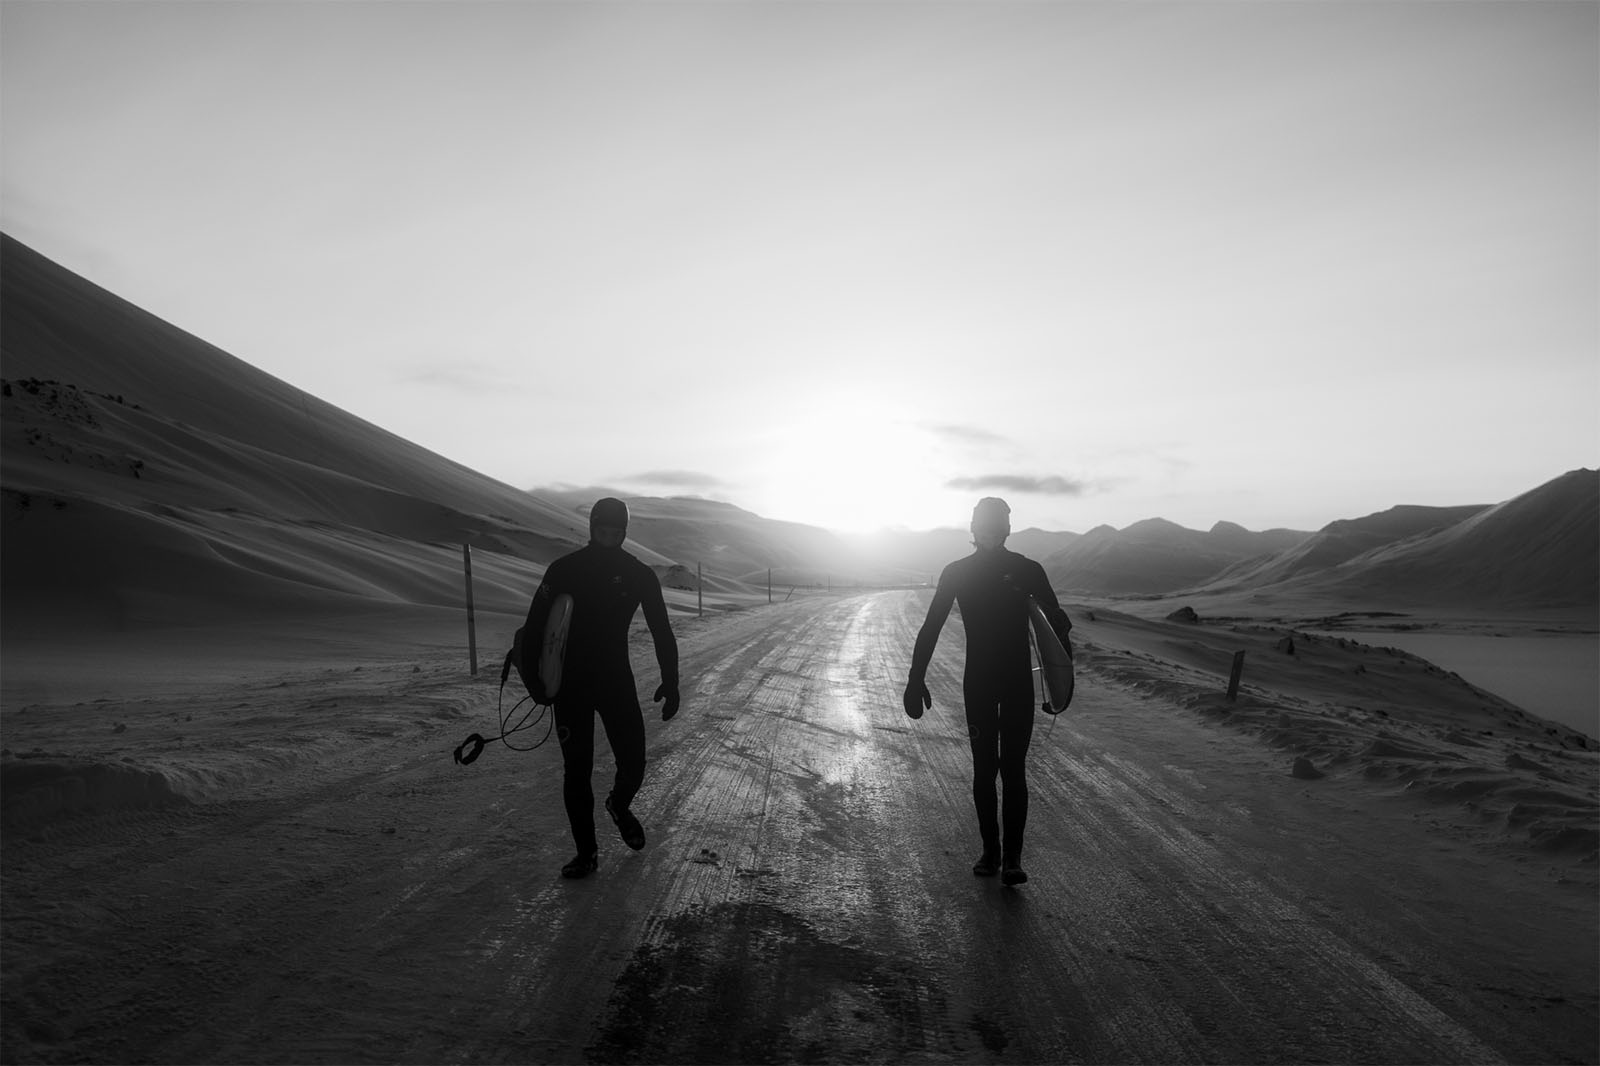 Two surfers in wetsuits walking on a snowy road towards a setting sun, with snow-covered hills on either side.